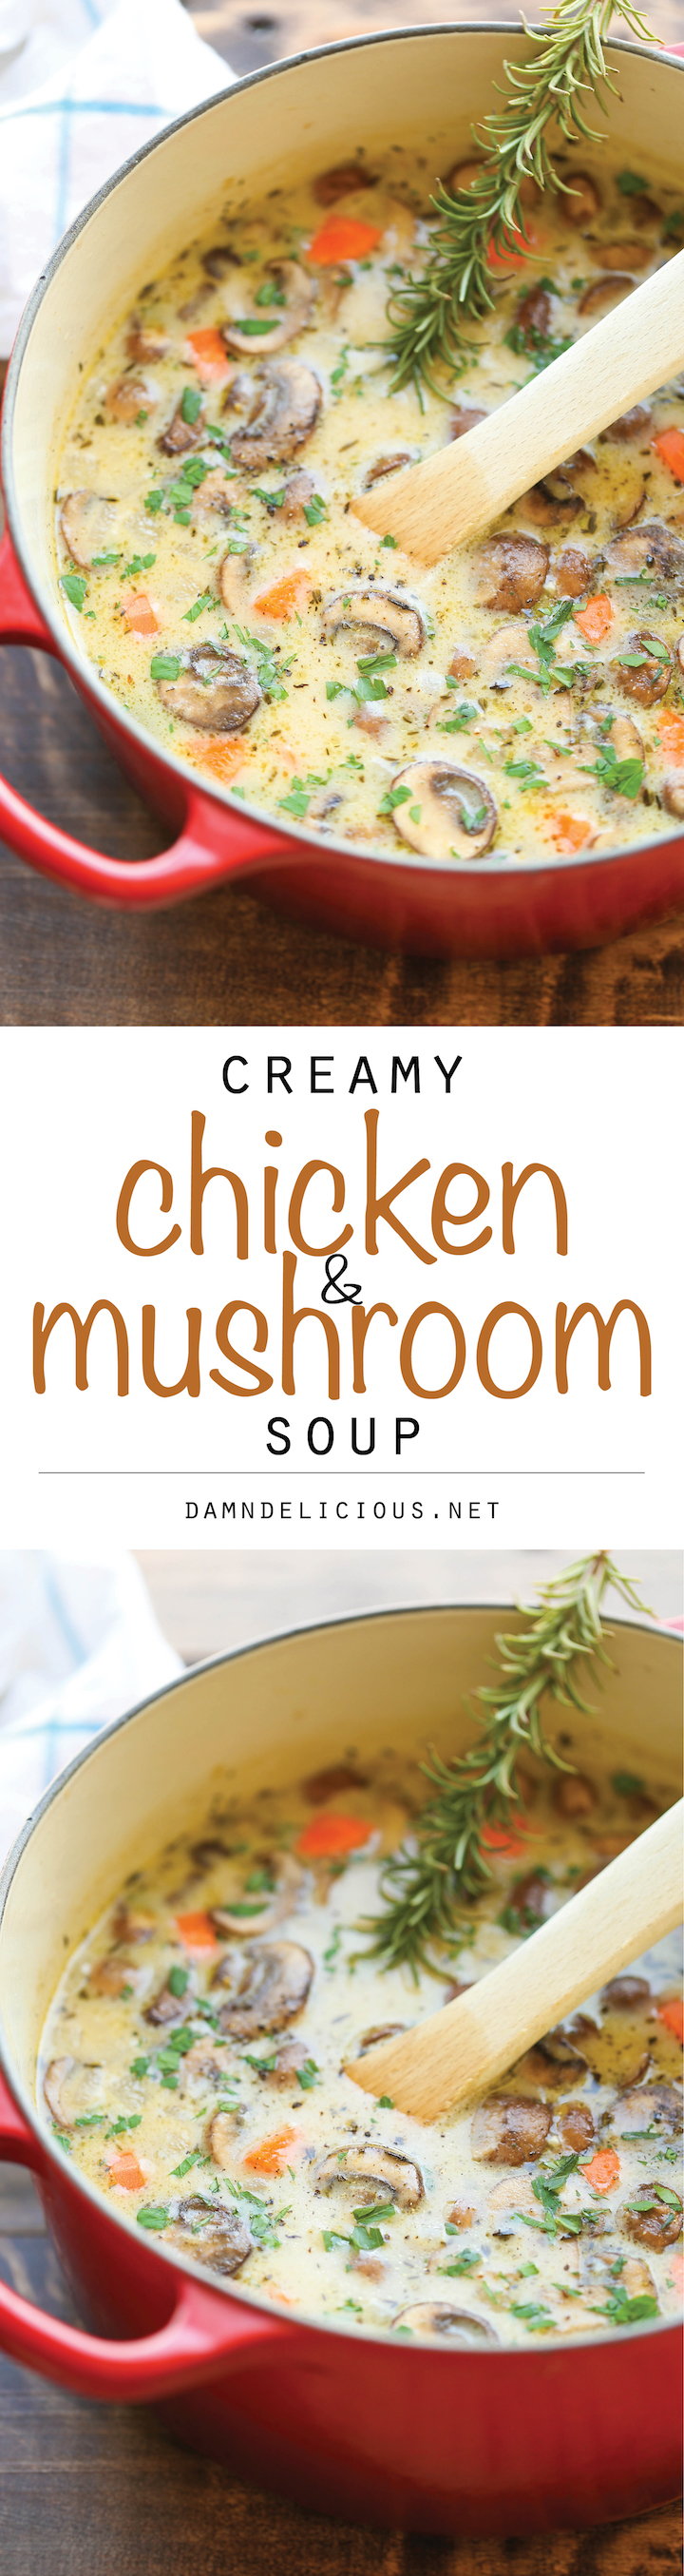 Creamy Chicken and Mushroom Soup - So cozy, so comforting and just so creamy. Best of all, this is made in 30 min from start to finish - so quick and easy!